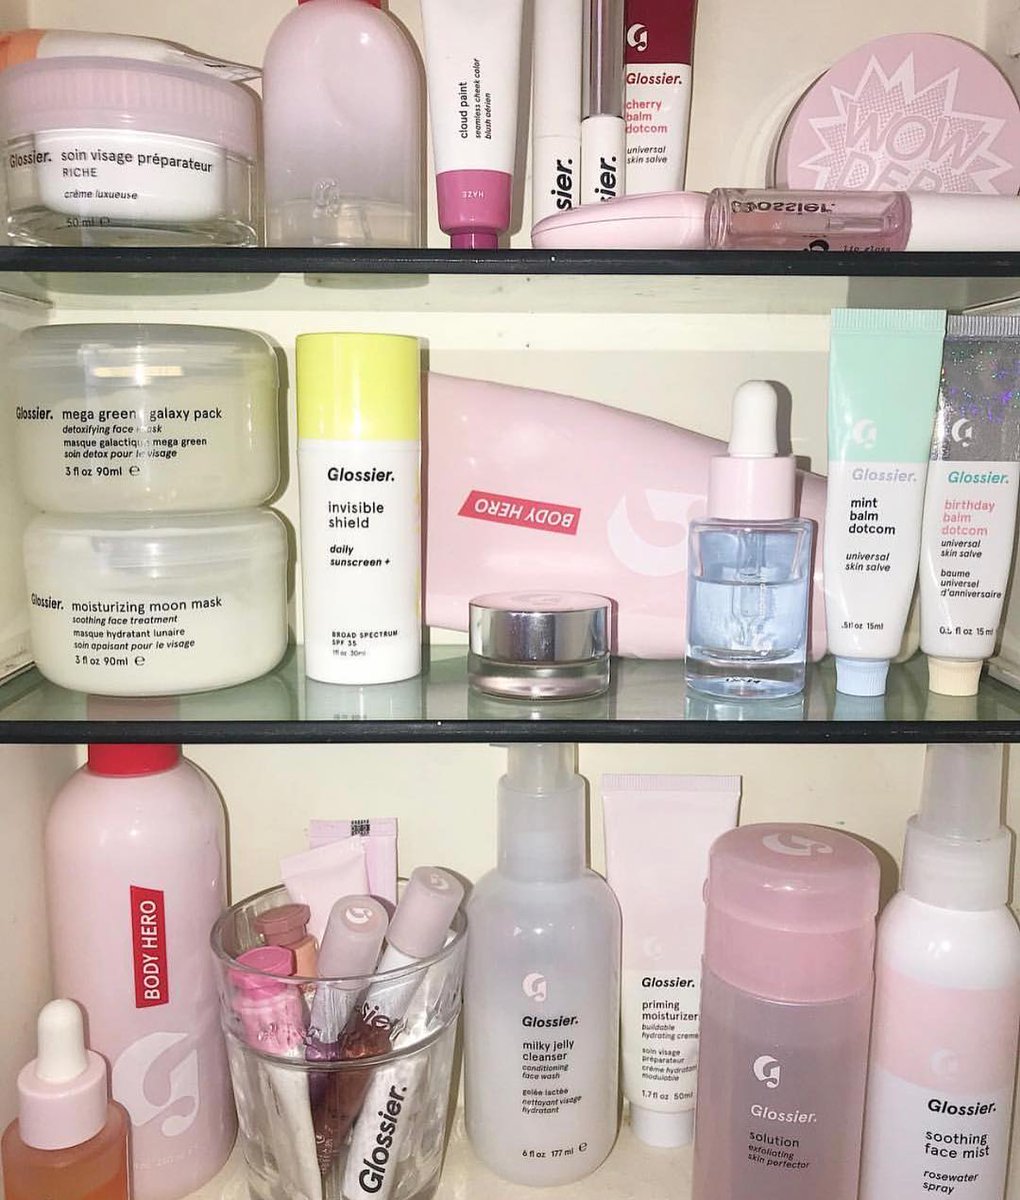 Glossier on "When every is your Top Shelf 🏆 📷: @gabriellerizzo https://t.co/AKgGpRNTTV" /